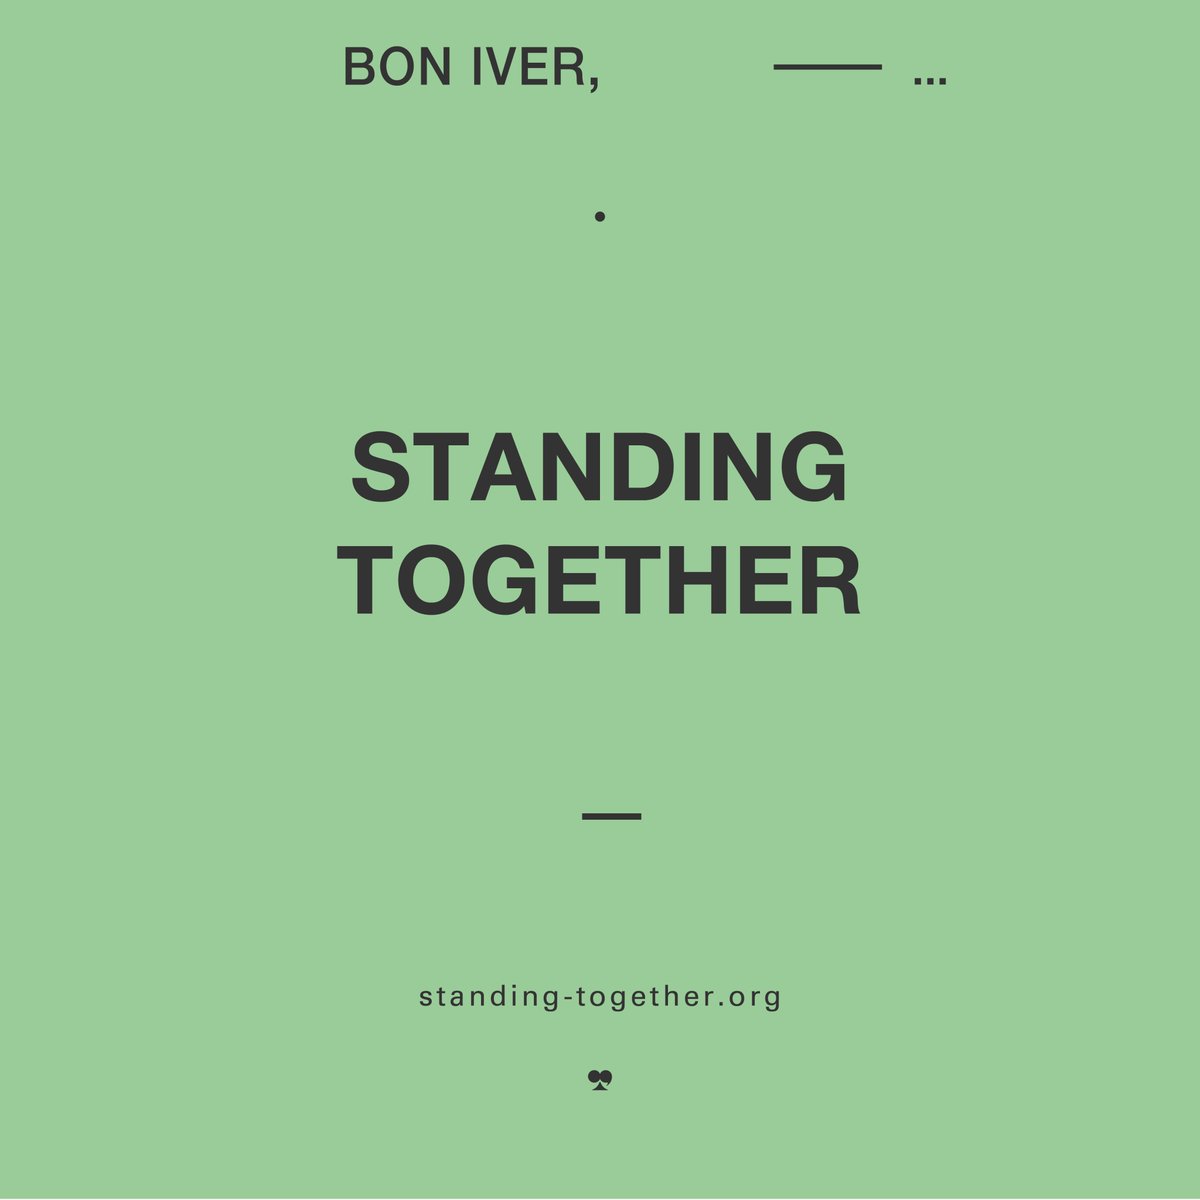 Bon Iver is donating to @omdimbeyachad (Standing Together), a New Israel Fund grantee. This grassroots movement mobilizes Jewish and Palestinian citizens of Israel in pursuit of peace, equality, and social and climate justice. standing-together.org/2023war